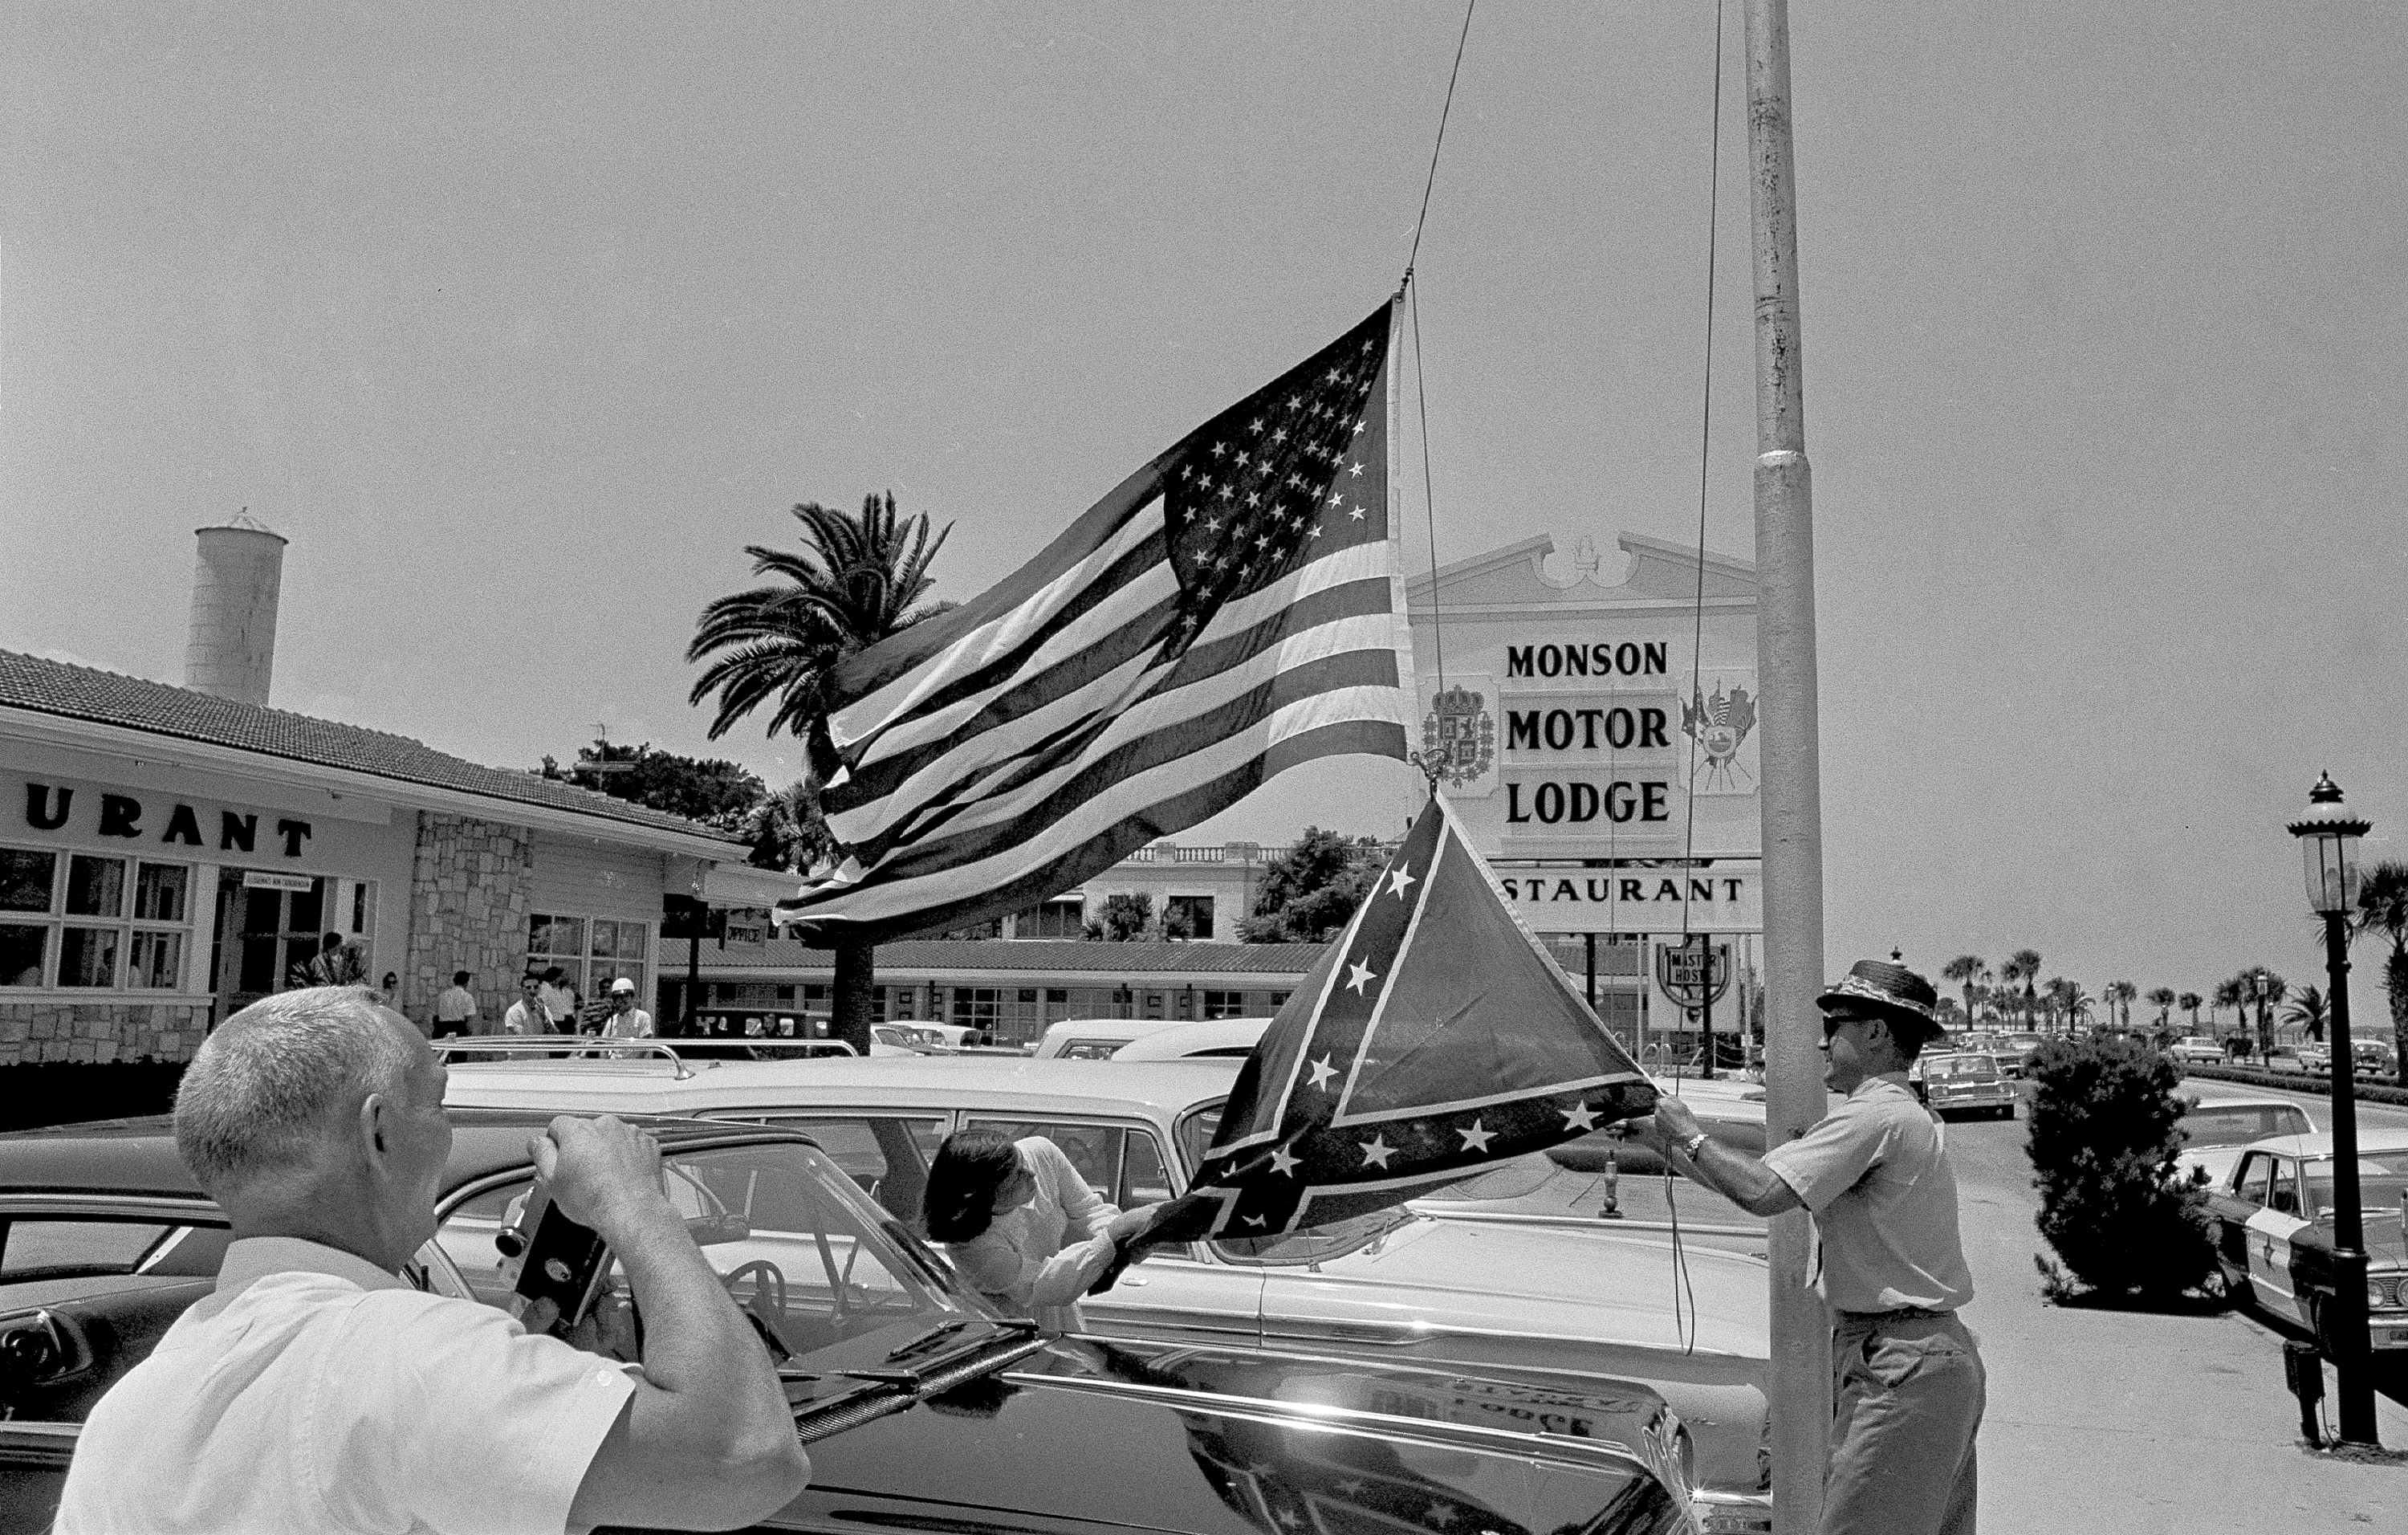 Motel and restaurant owner James Brock and his daughter, Robin, 13, raise a confederate flag in front of the Monson Motor Lodge in St. Augustine, Fla., June 19, 1964.  The motel has been a target of integrationists for several weeks.  (AP Photo)